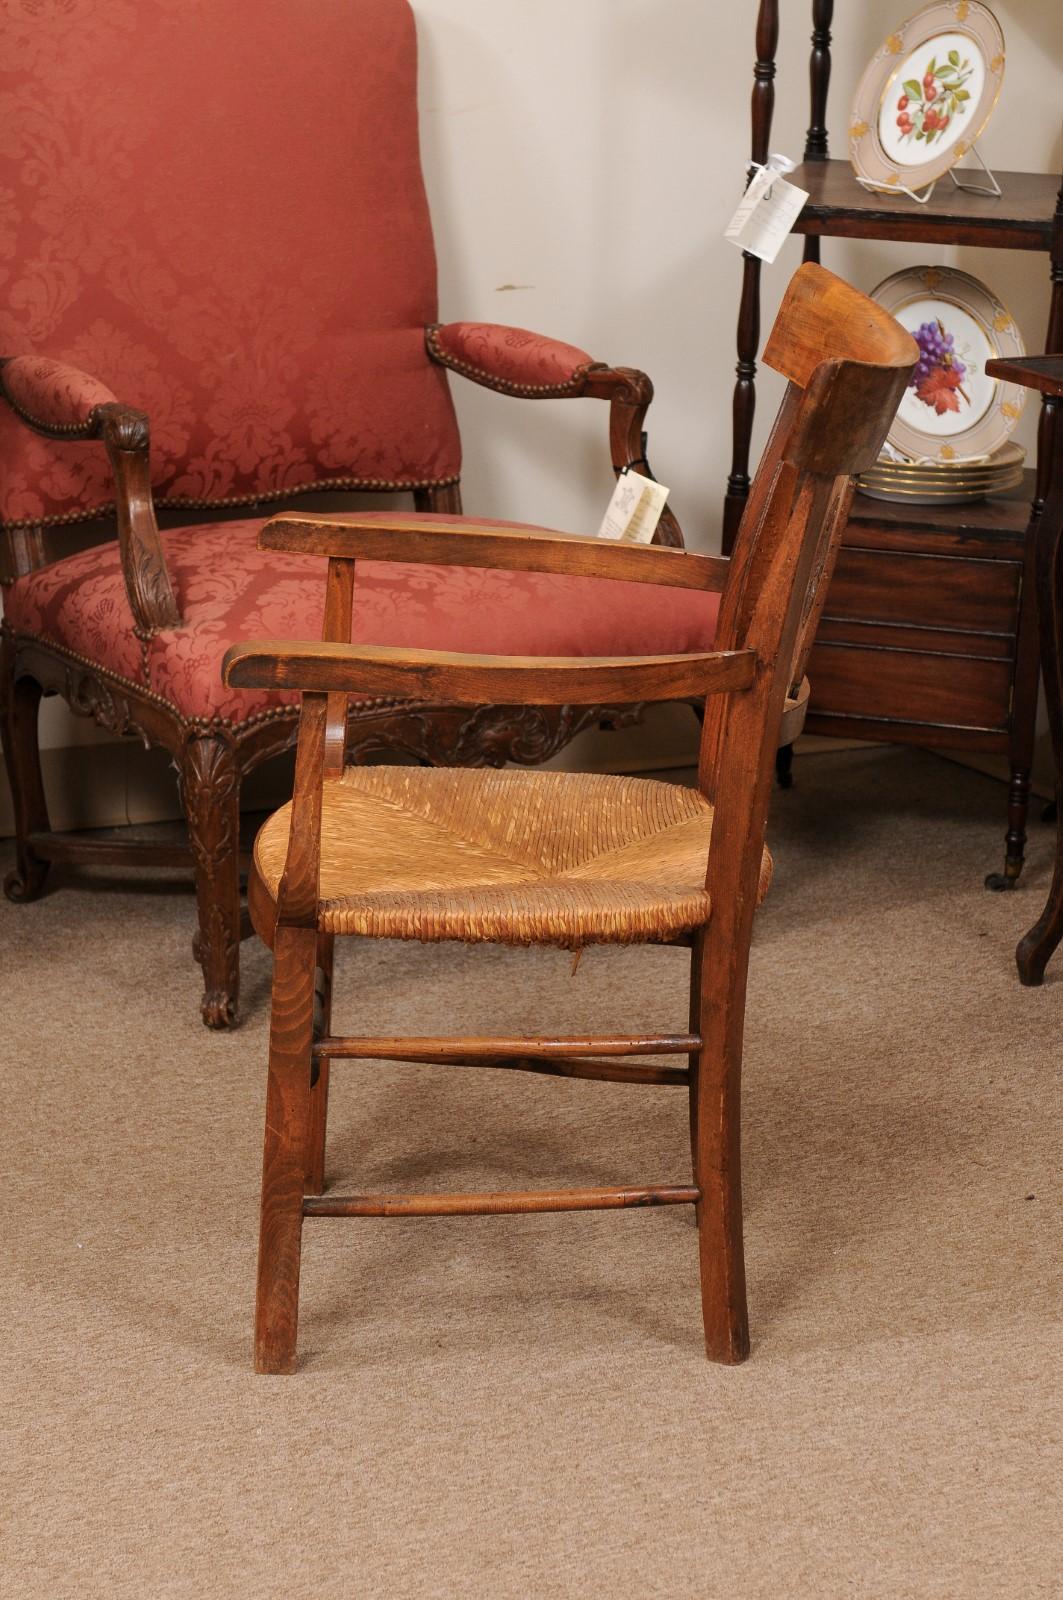 Mid-19th Century Fruitwood Rush Seat Armchair with Flower Basket Backsplat, Italy ca. 1850 For Sale